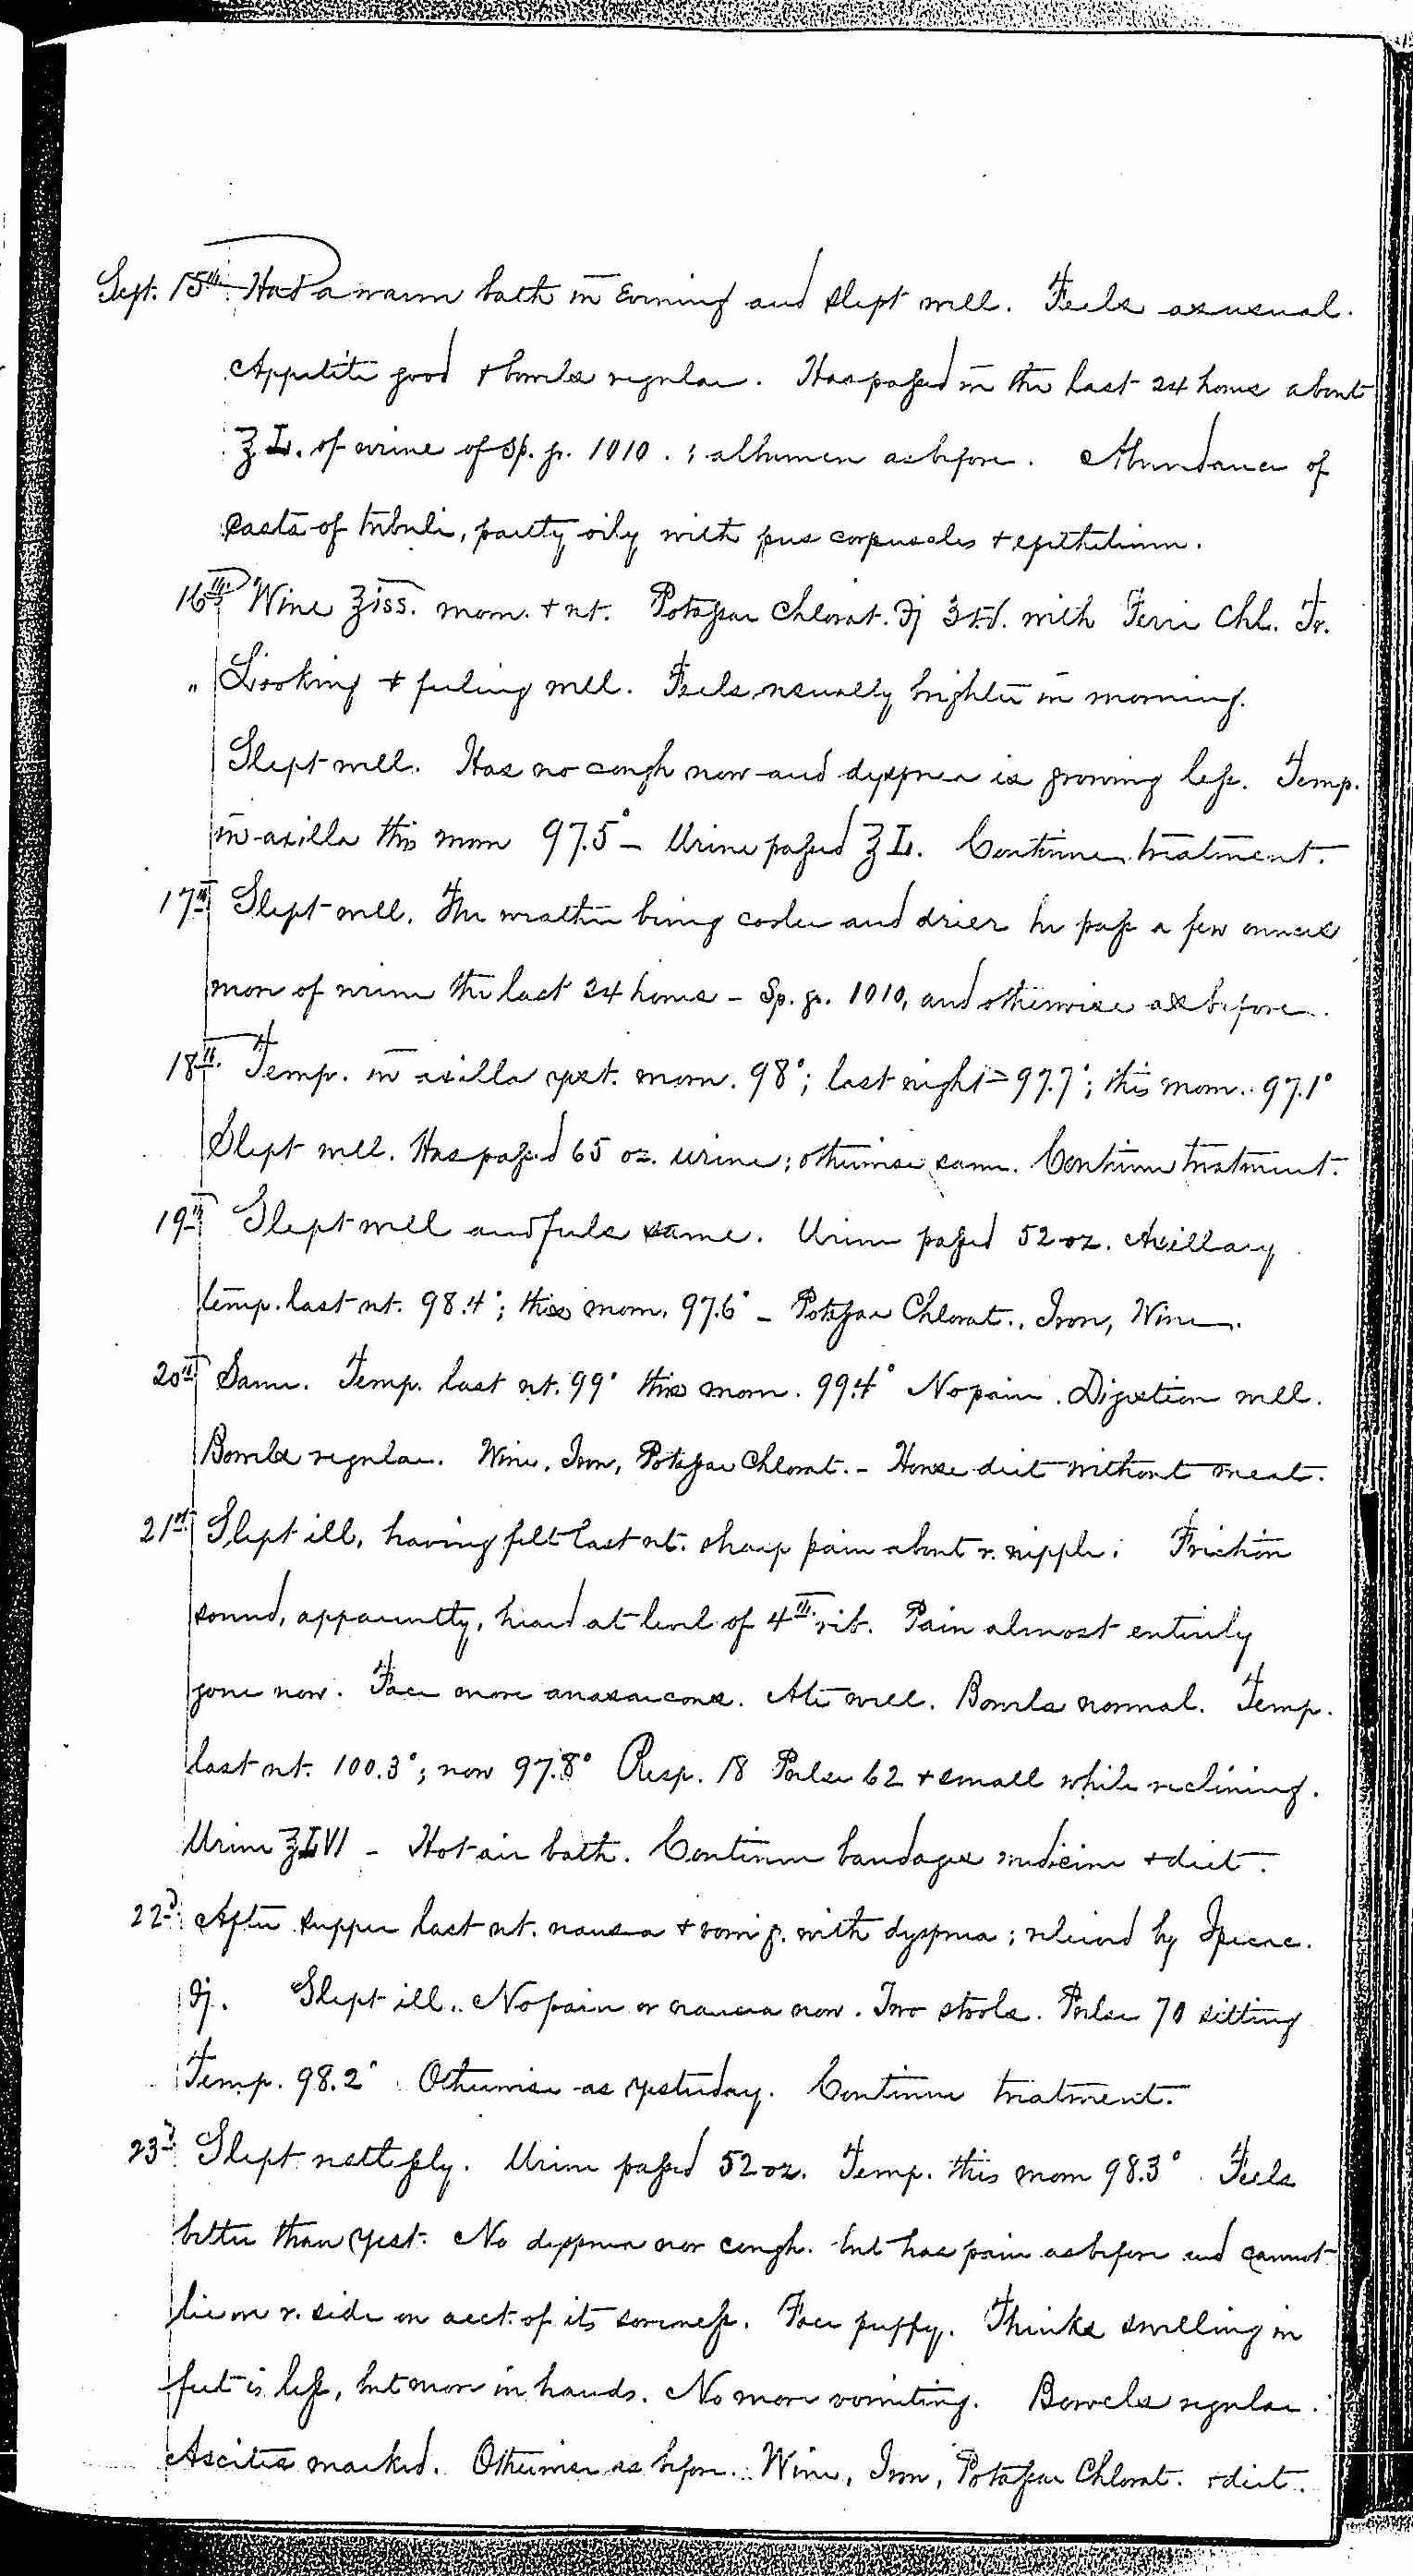 Entry for Bernard Coyne (page 3 of 13) in the log Hospital Tickets and Case Papers - Naval Hospital - Washington, D.C. - 1868-69